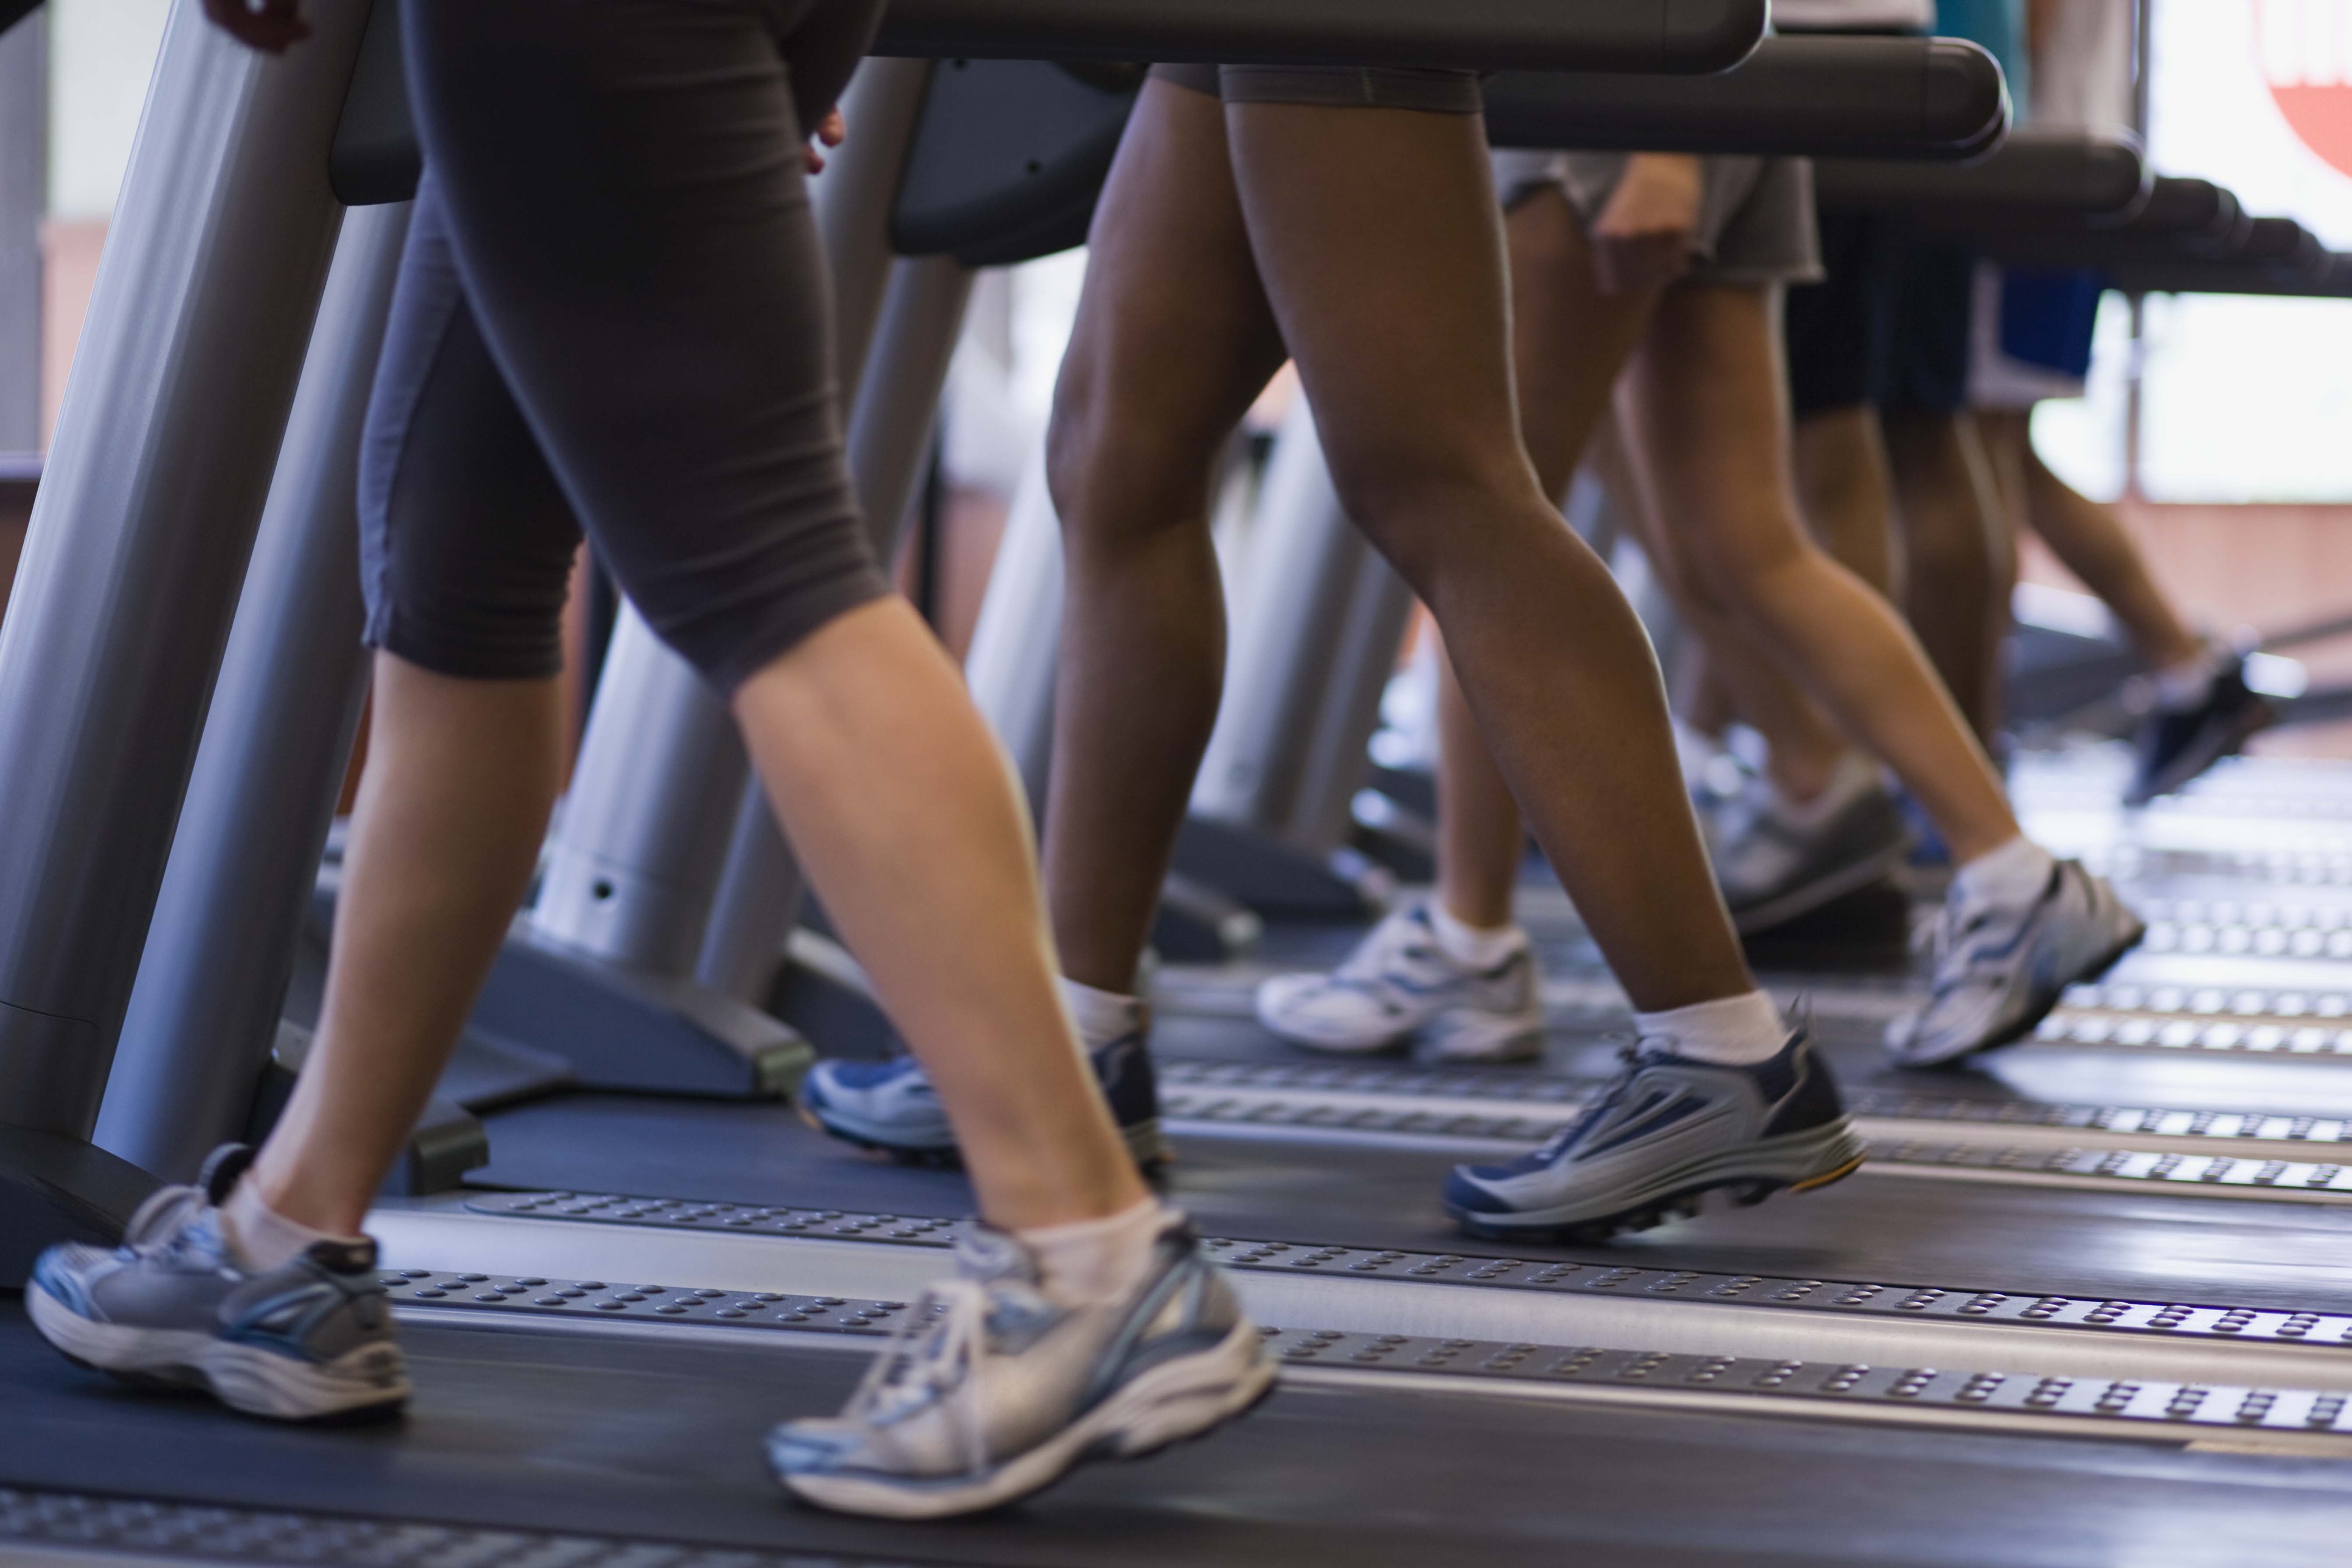 Exercising throughout adulthood can help to keep depression at bay (Jupiterimages&mdash;Getty Images)